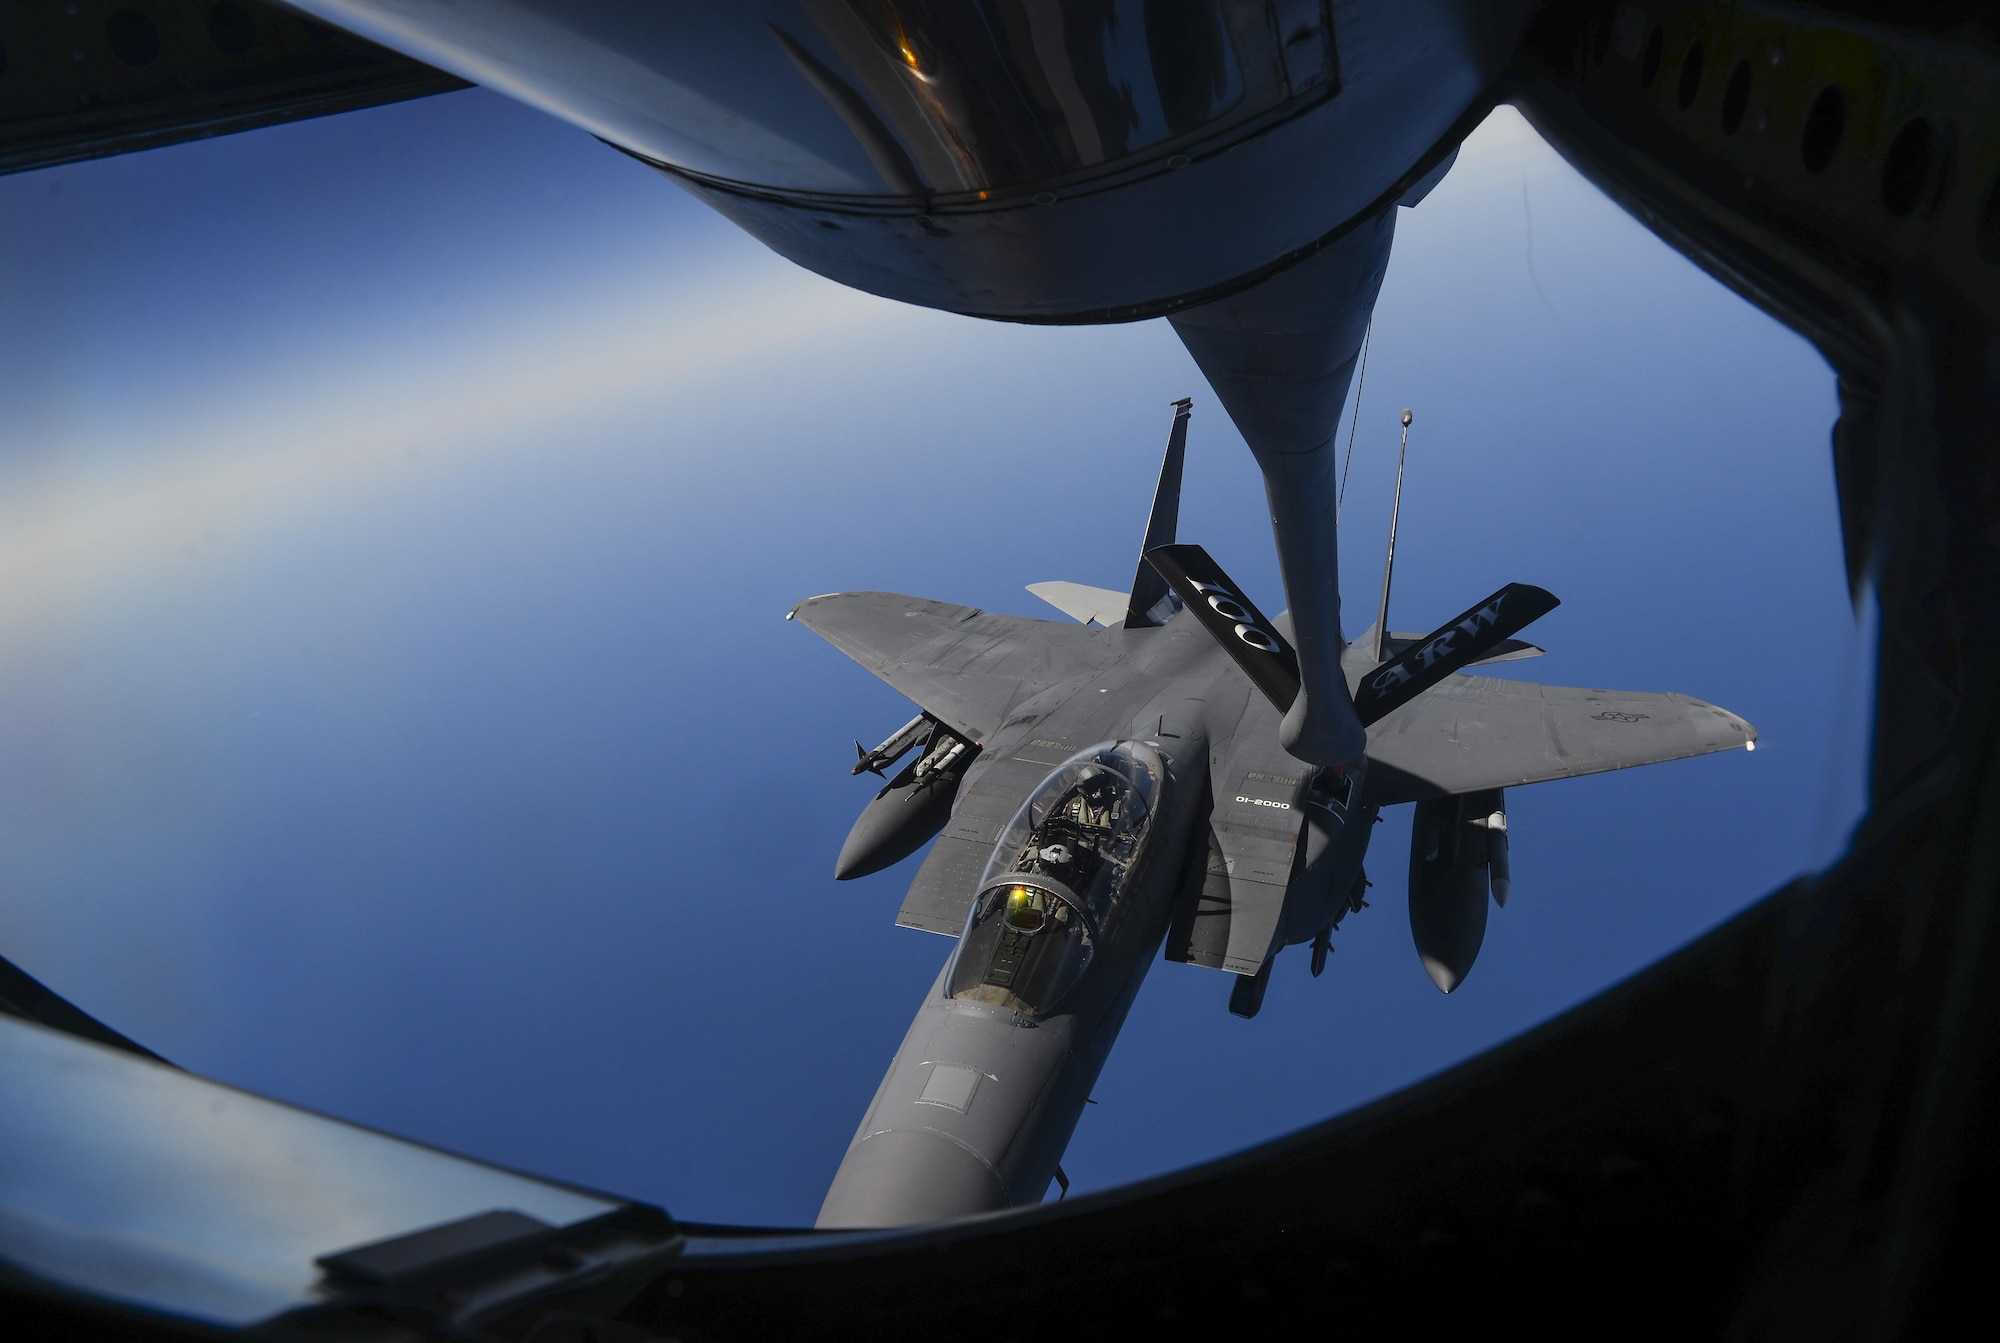 A U.S. Air Force F-15E Strike Eagle receives fuel from a KC-135 Stratotanker May 3, 2017. The F-15E Strike Eagle is a dual-role fighter designed to perform air-to-air and air-to-ground missions. (U.S. Air Force photo by Staff Sgt. Micaiah Anthony)